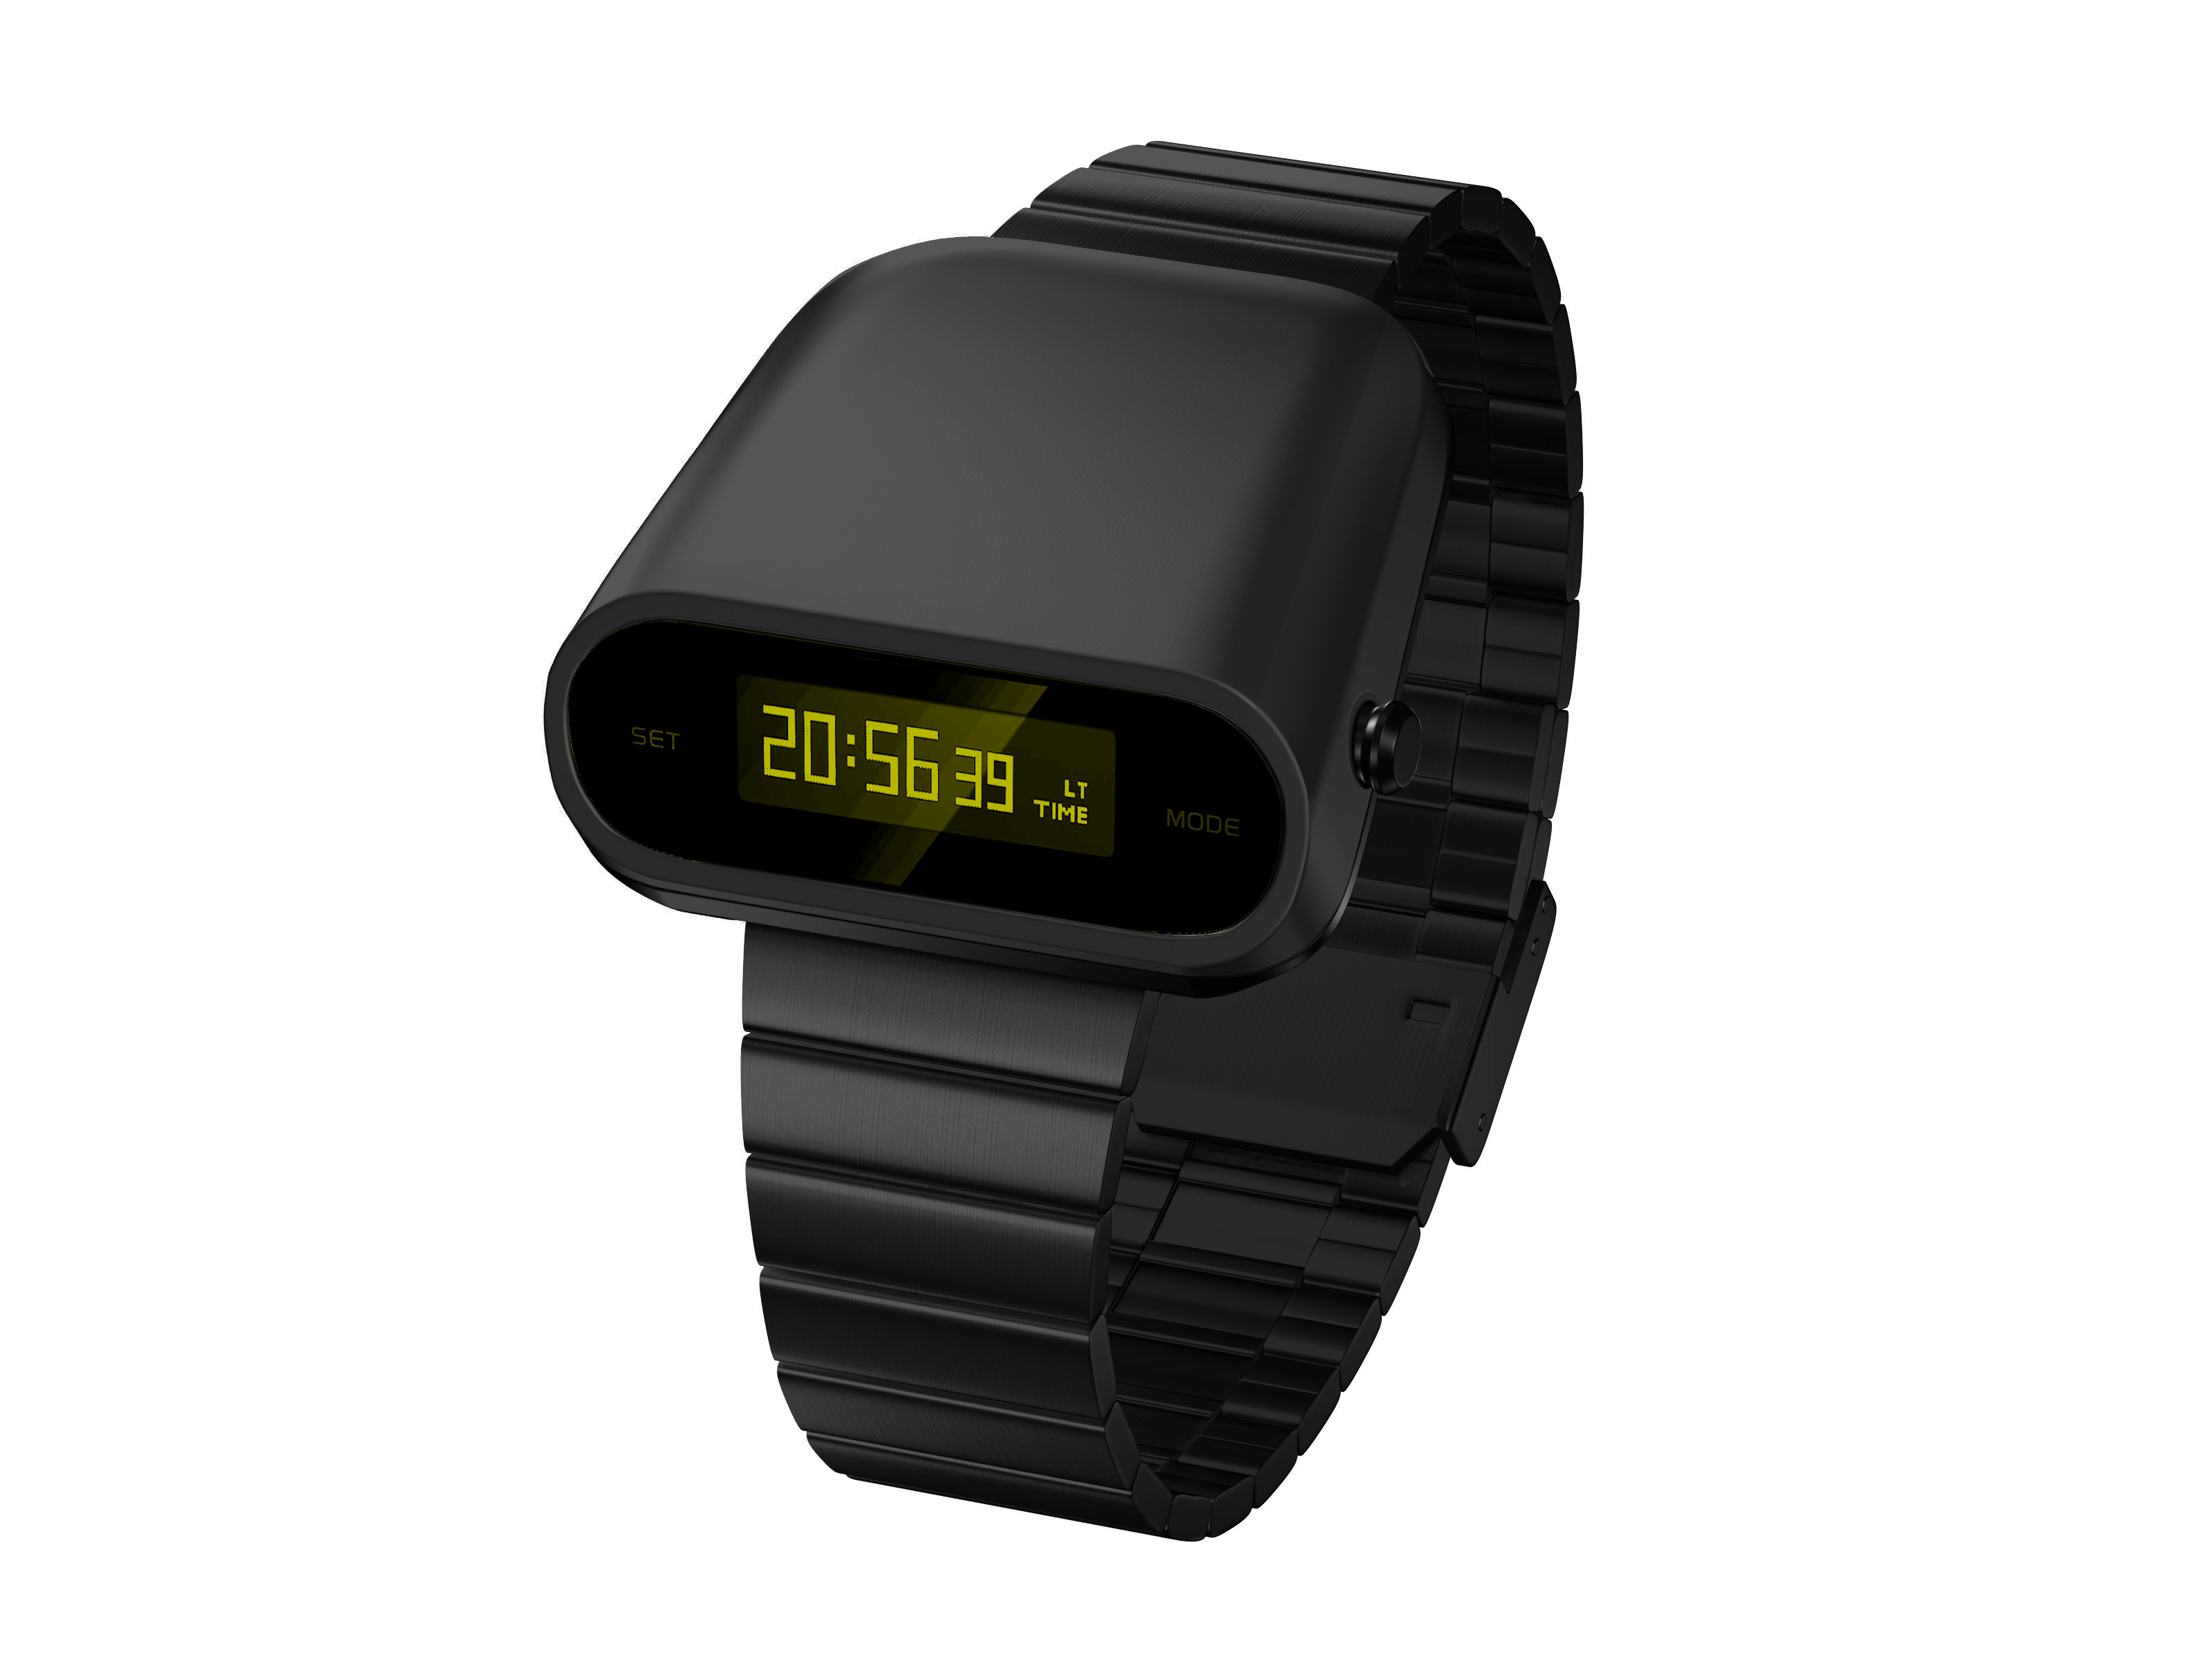 retro digital watch-front view-S1000BY